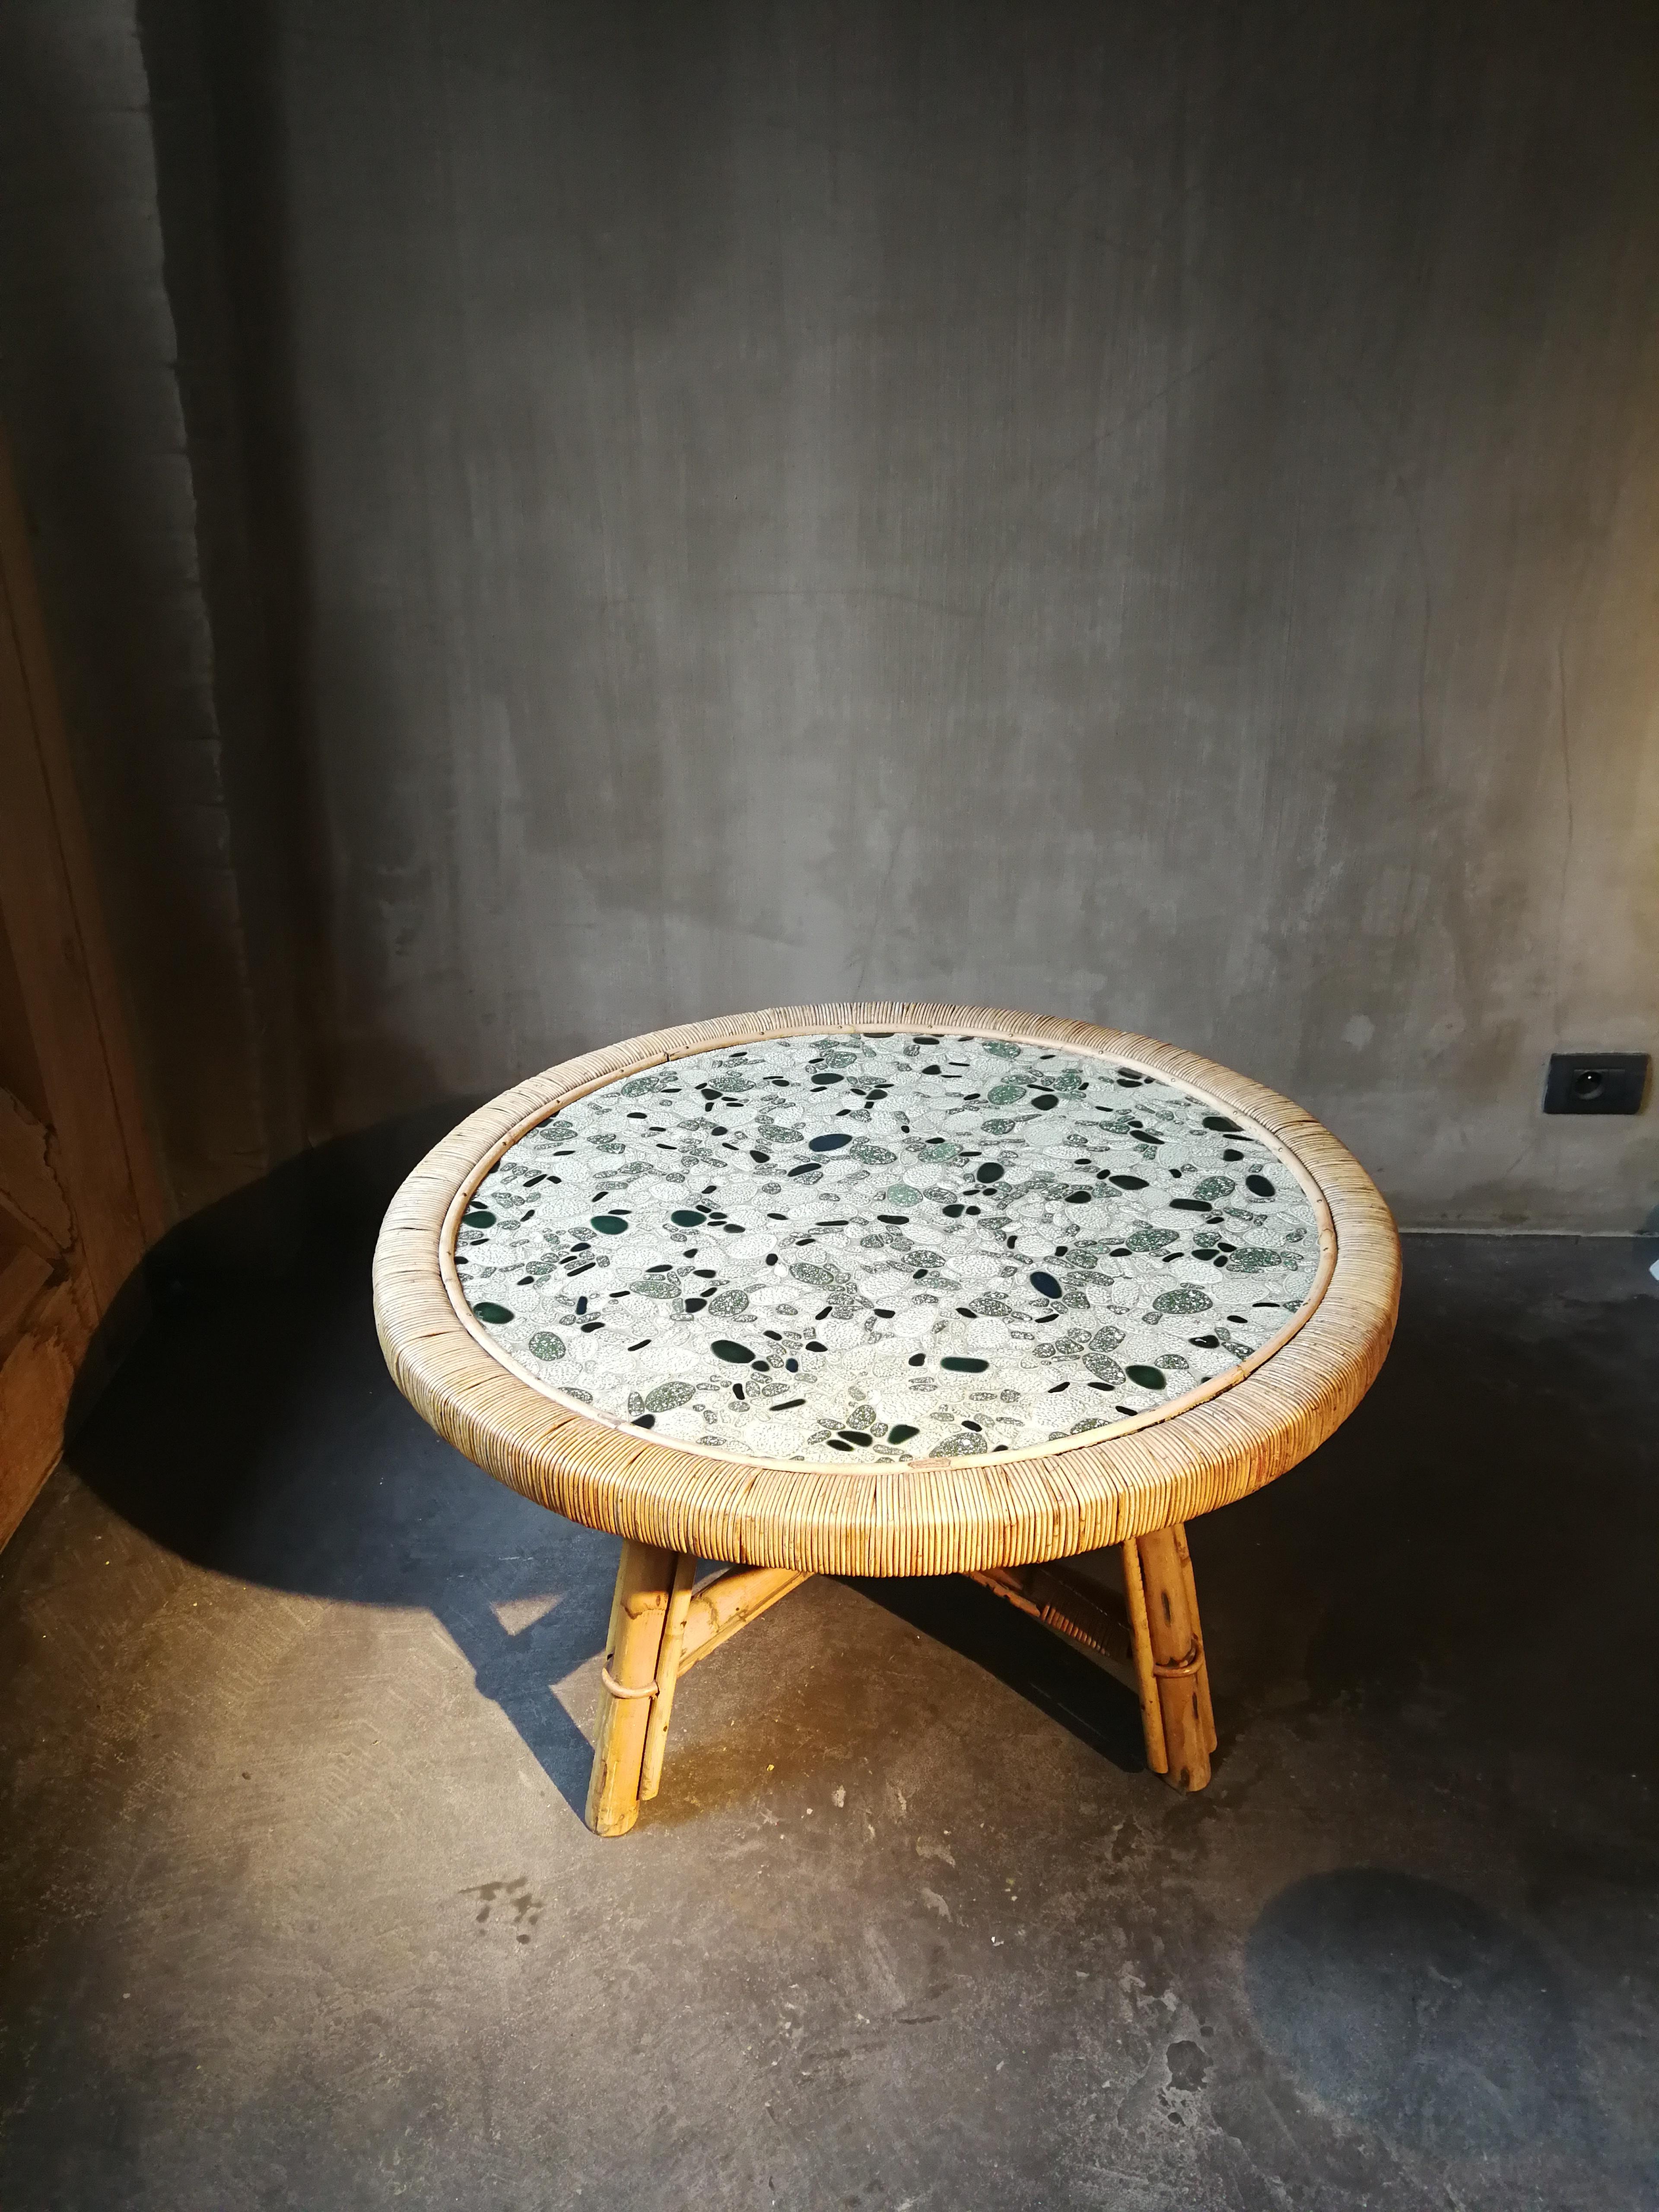 This table is in perfect condition and has a beautiful green patterned mosaic top. It would suit perfect in a holiday home or in a poolhouse.
 